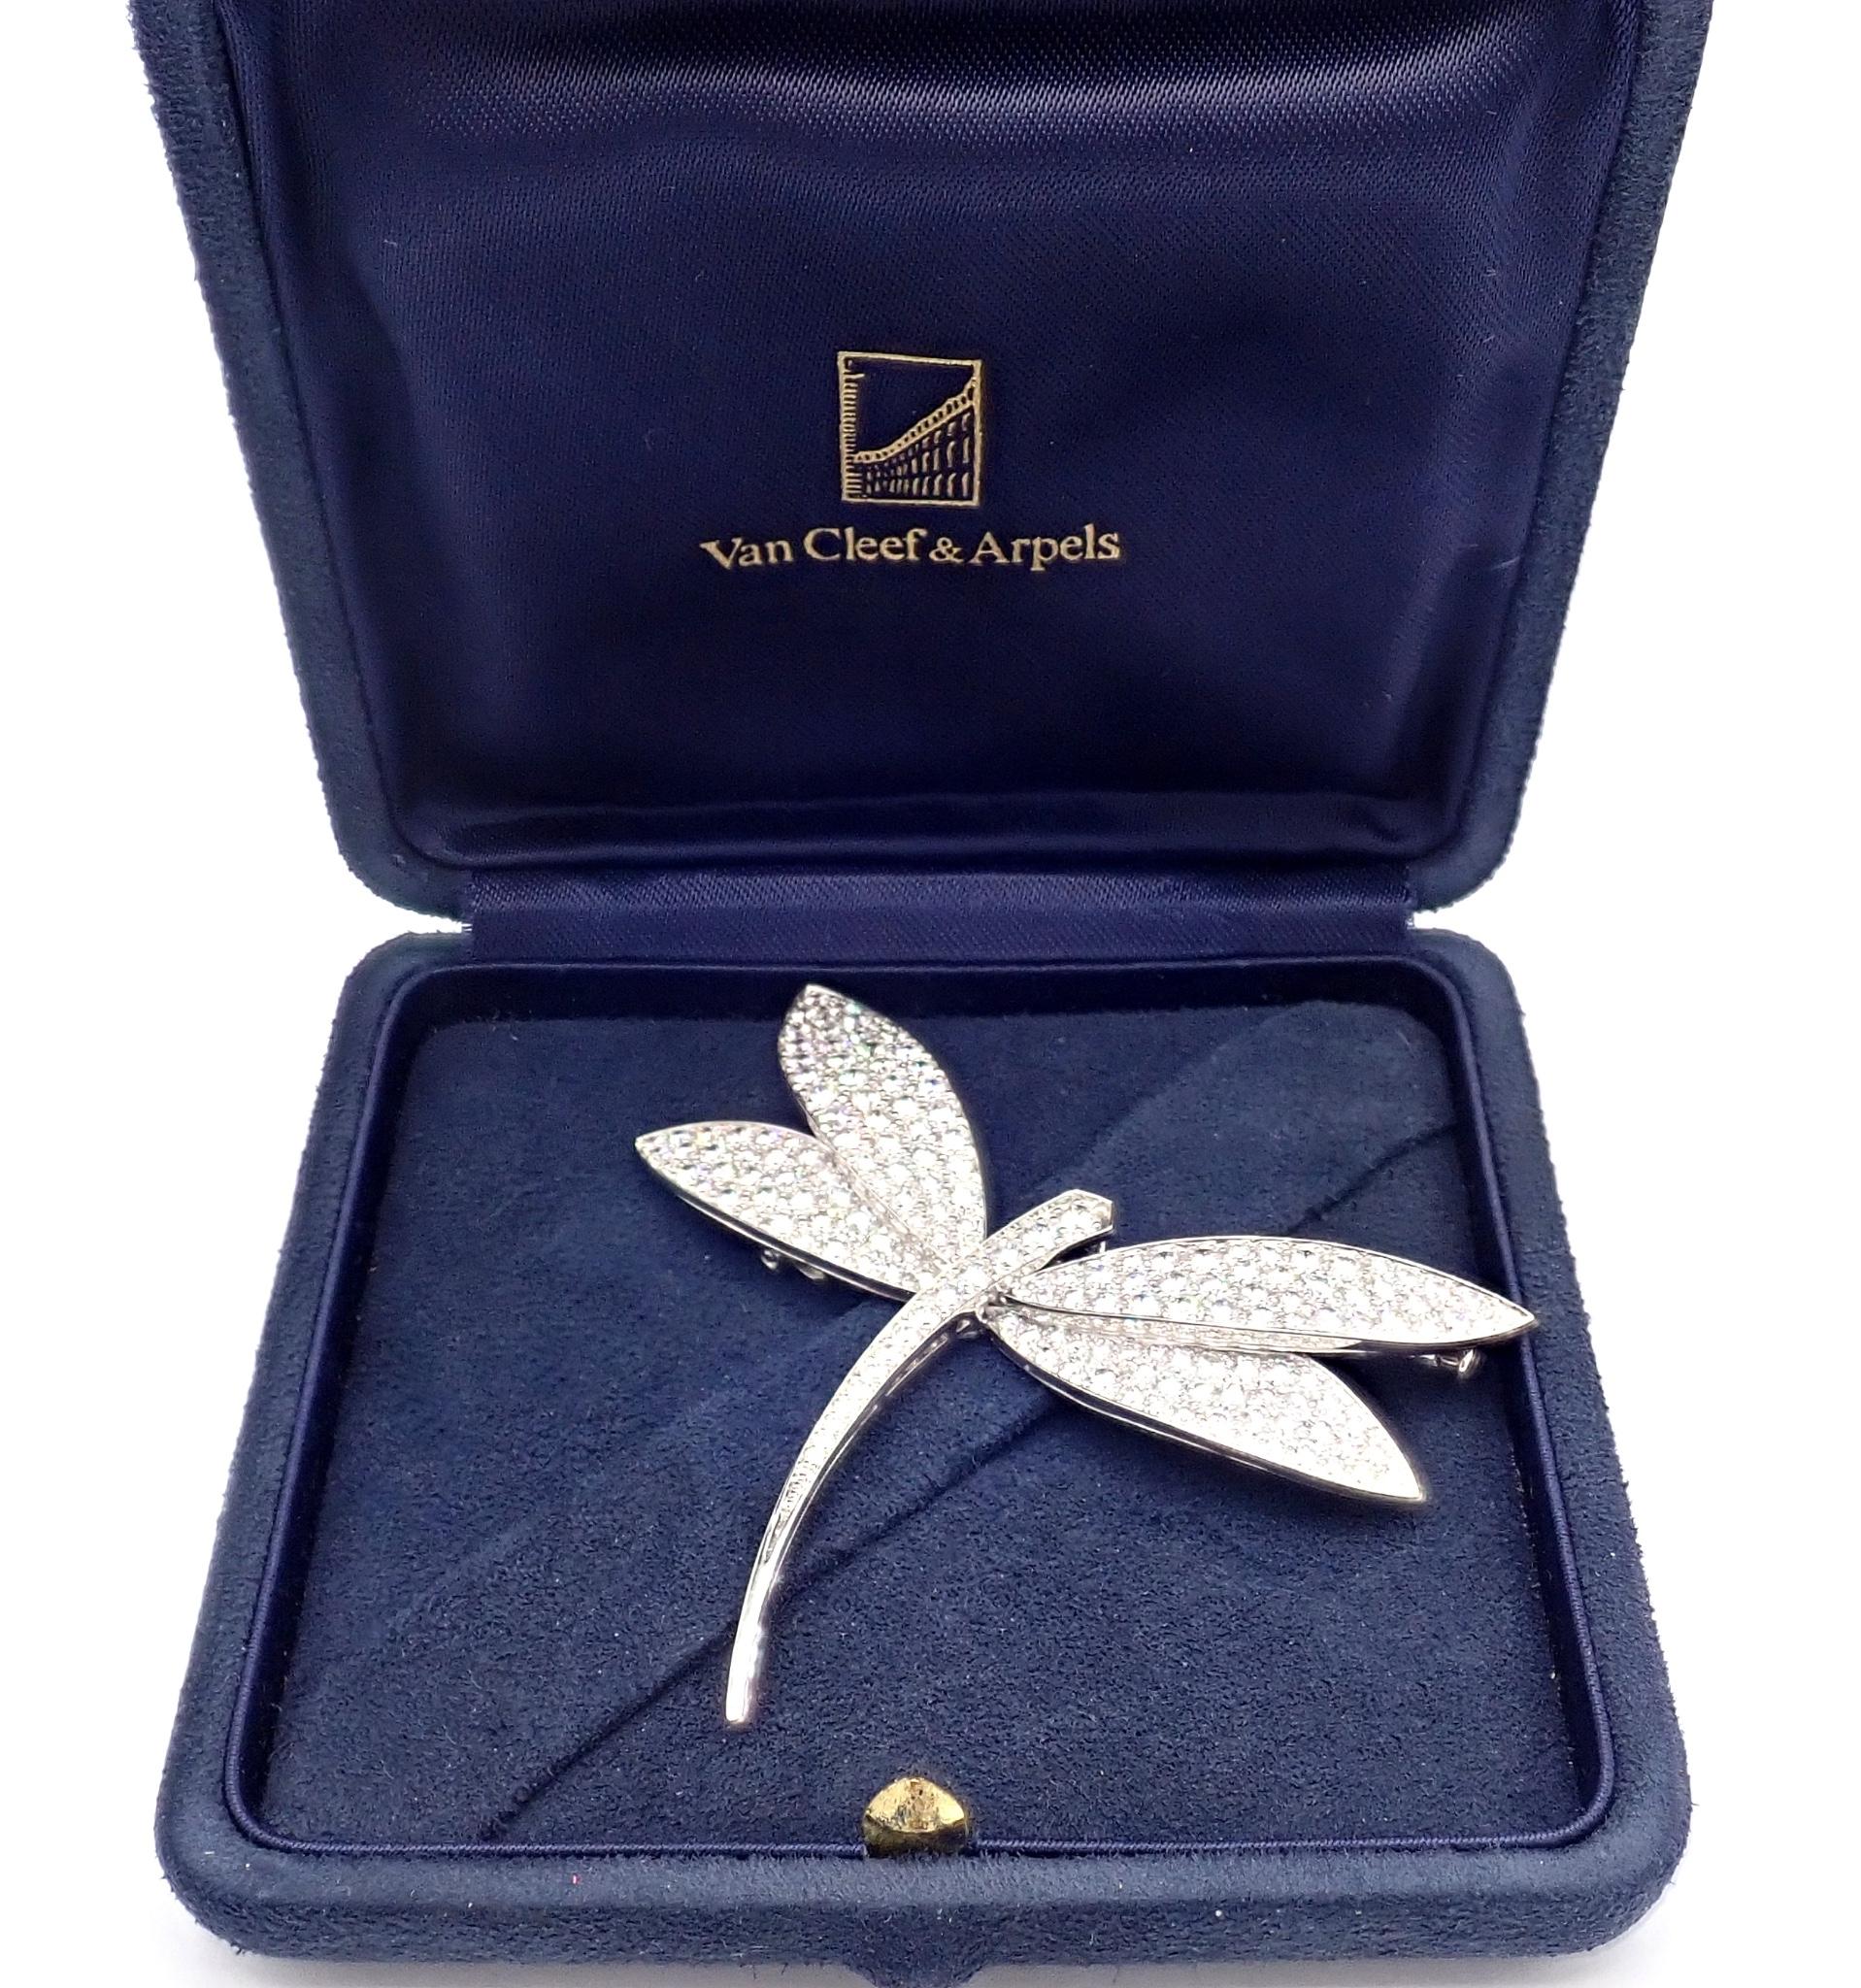 Brilliant Cut Van Cleef & Arpels Dragonfly Diamond Extra Large White Gold Pin Brooch